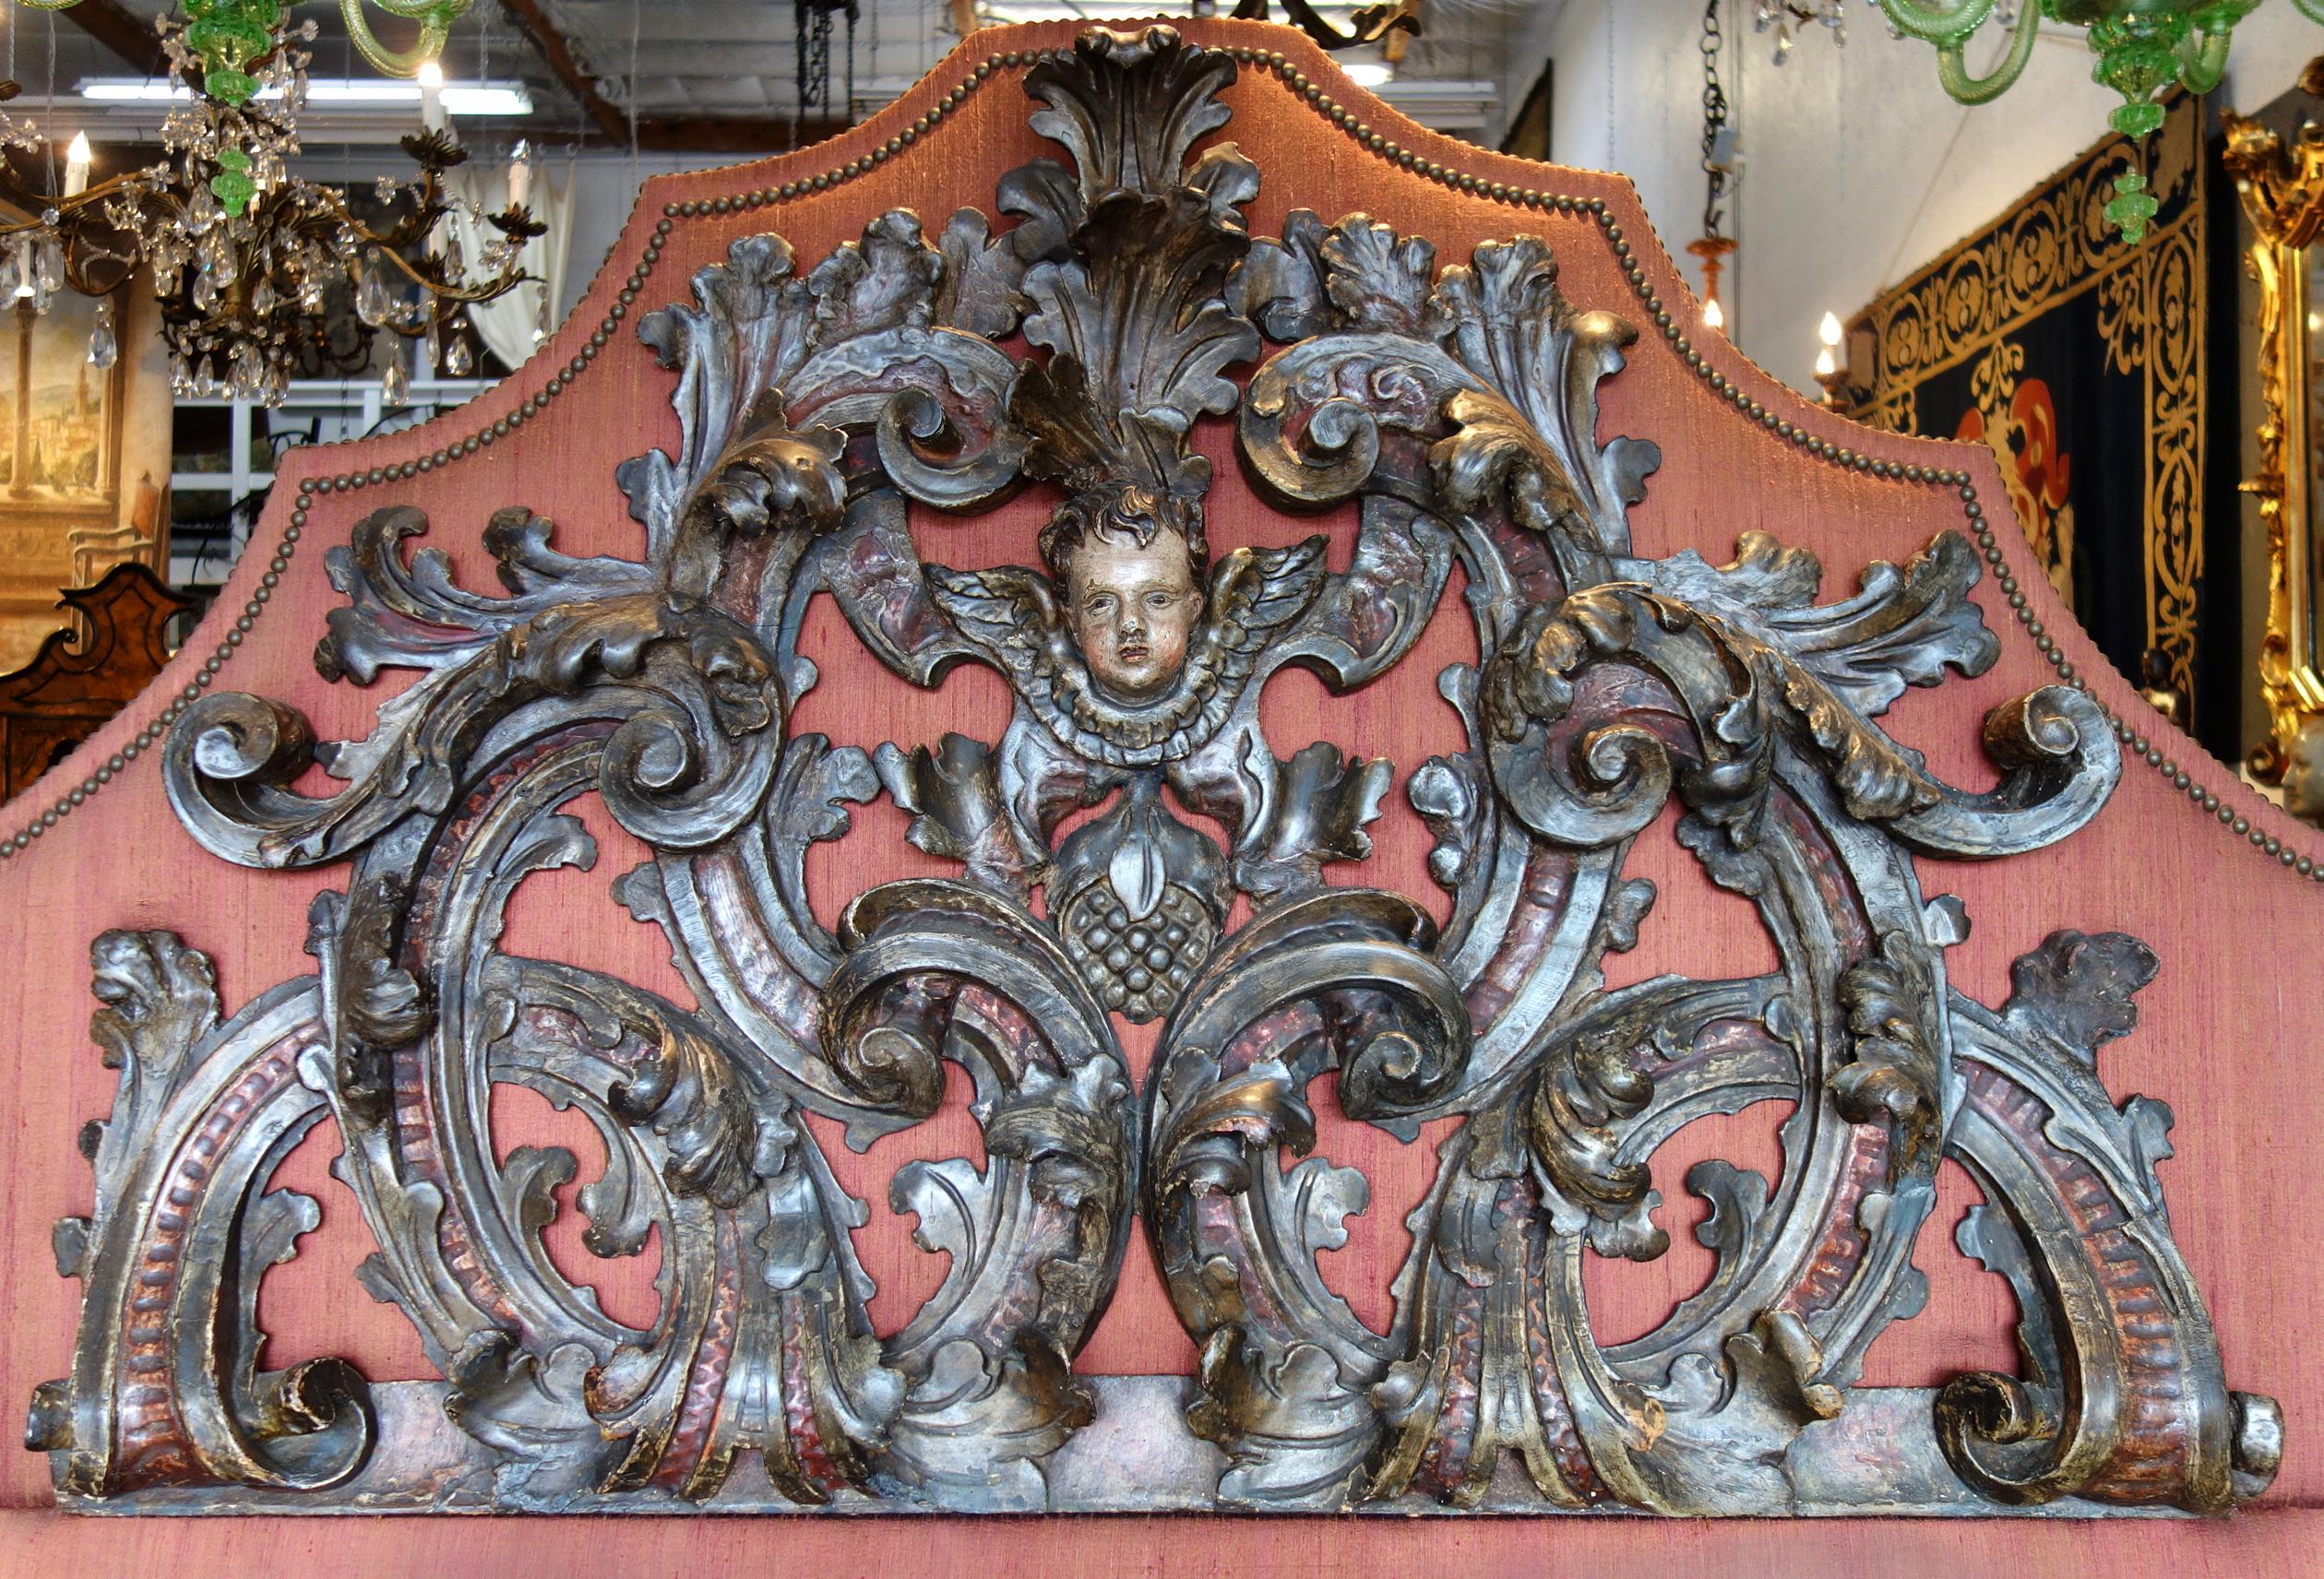 Late 17th century Italian Baroque lintel carved in triangular shape with acanthus scrolls, centered by a winged cherub face. Polychrome painted. Superb Italian craftsmanship. Previously refinished. Currently mounted to an upholstered headboard